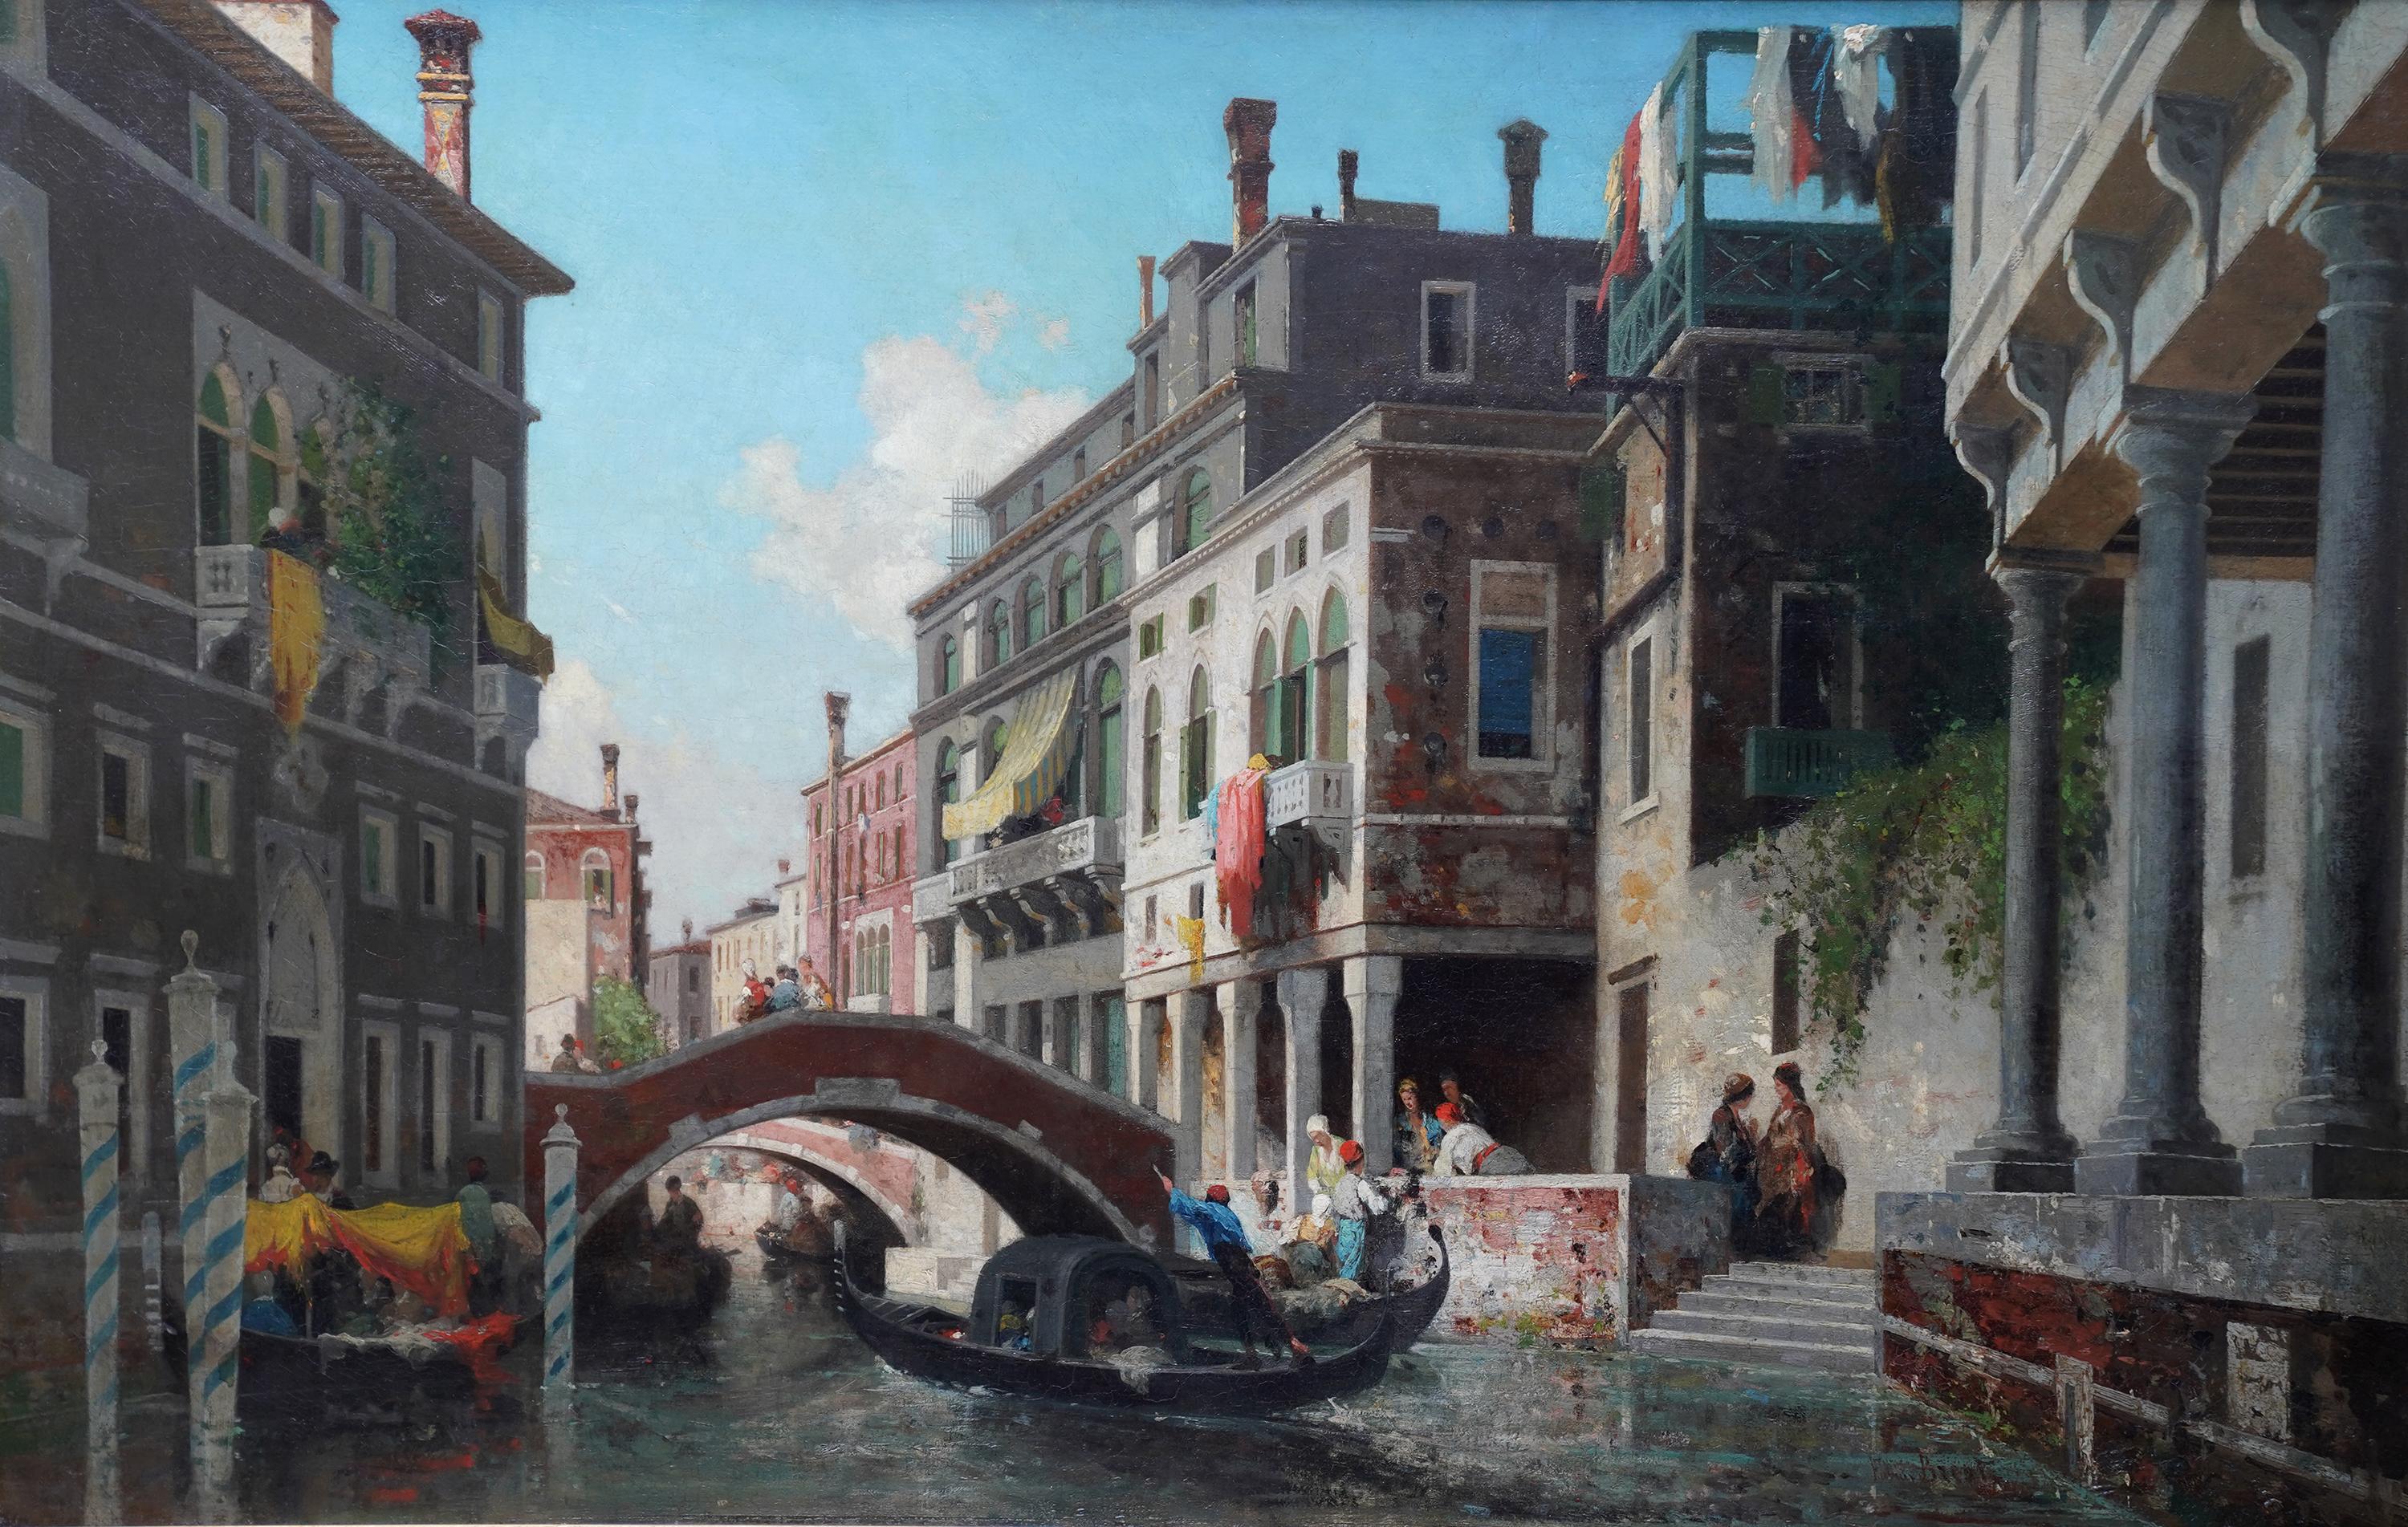 Gondolas on a Venetian Canal - French Victorian art oil painting Venice Italy - Painting by Germain Fabius Brest